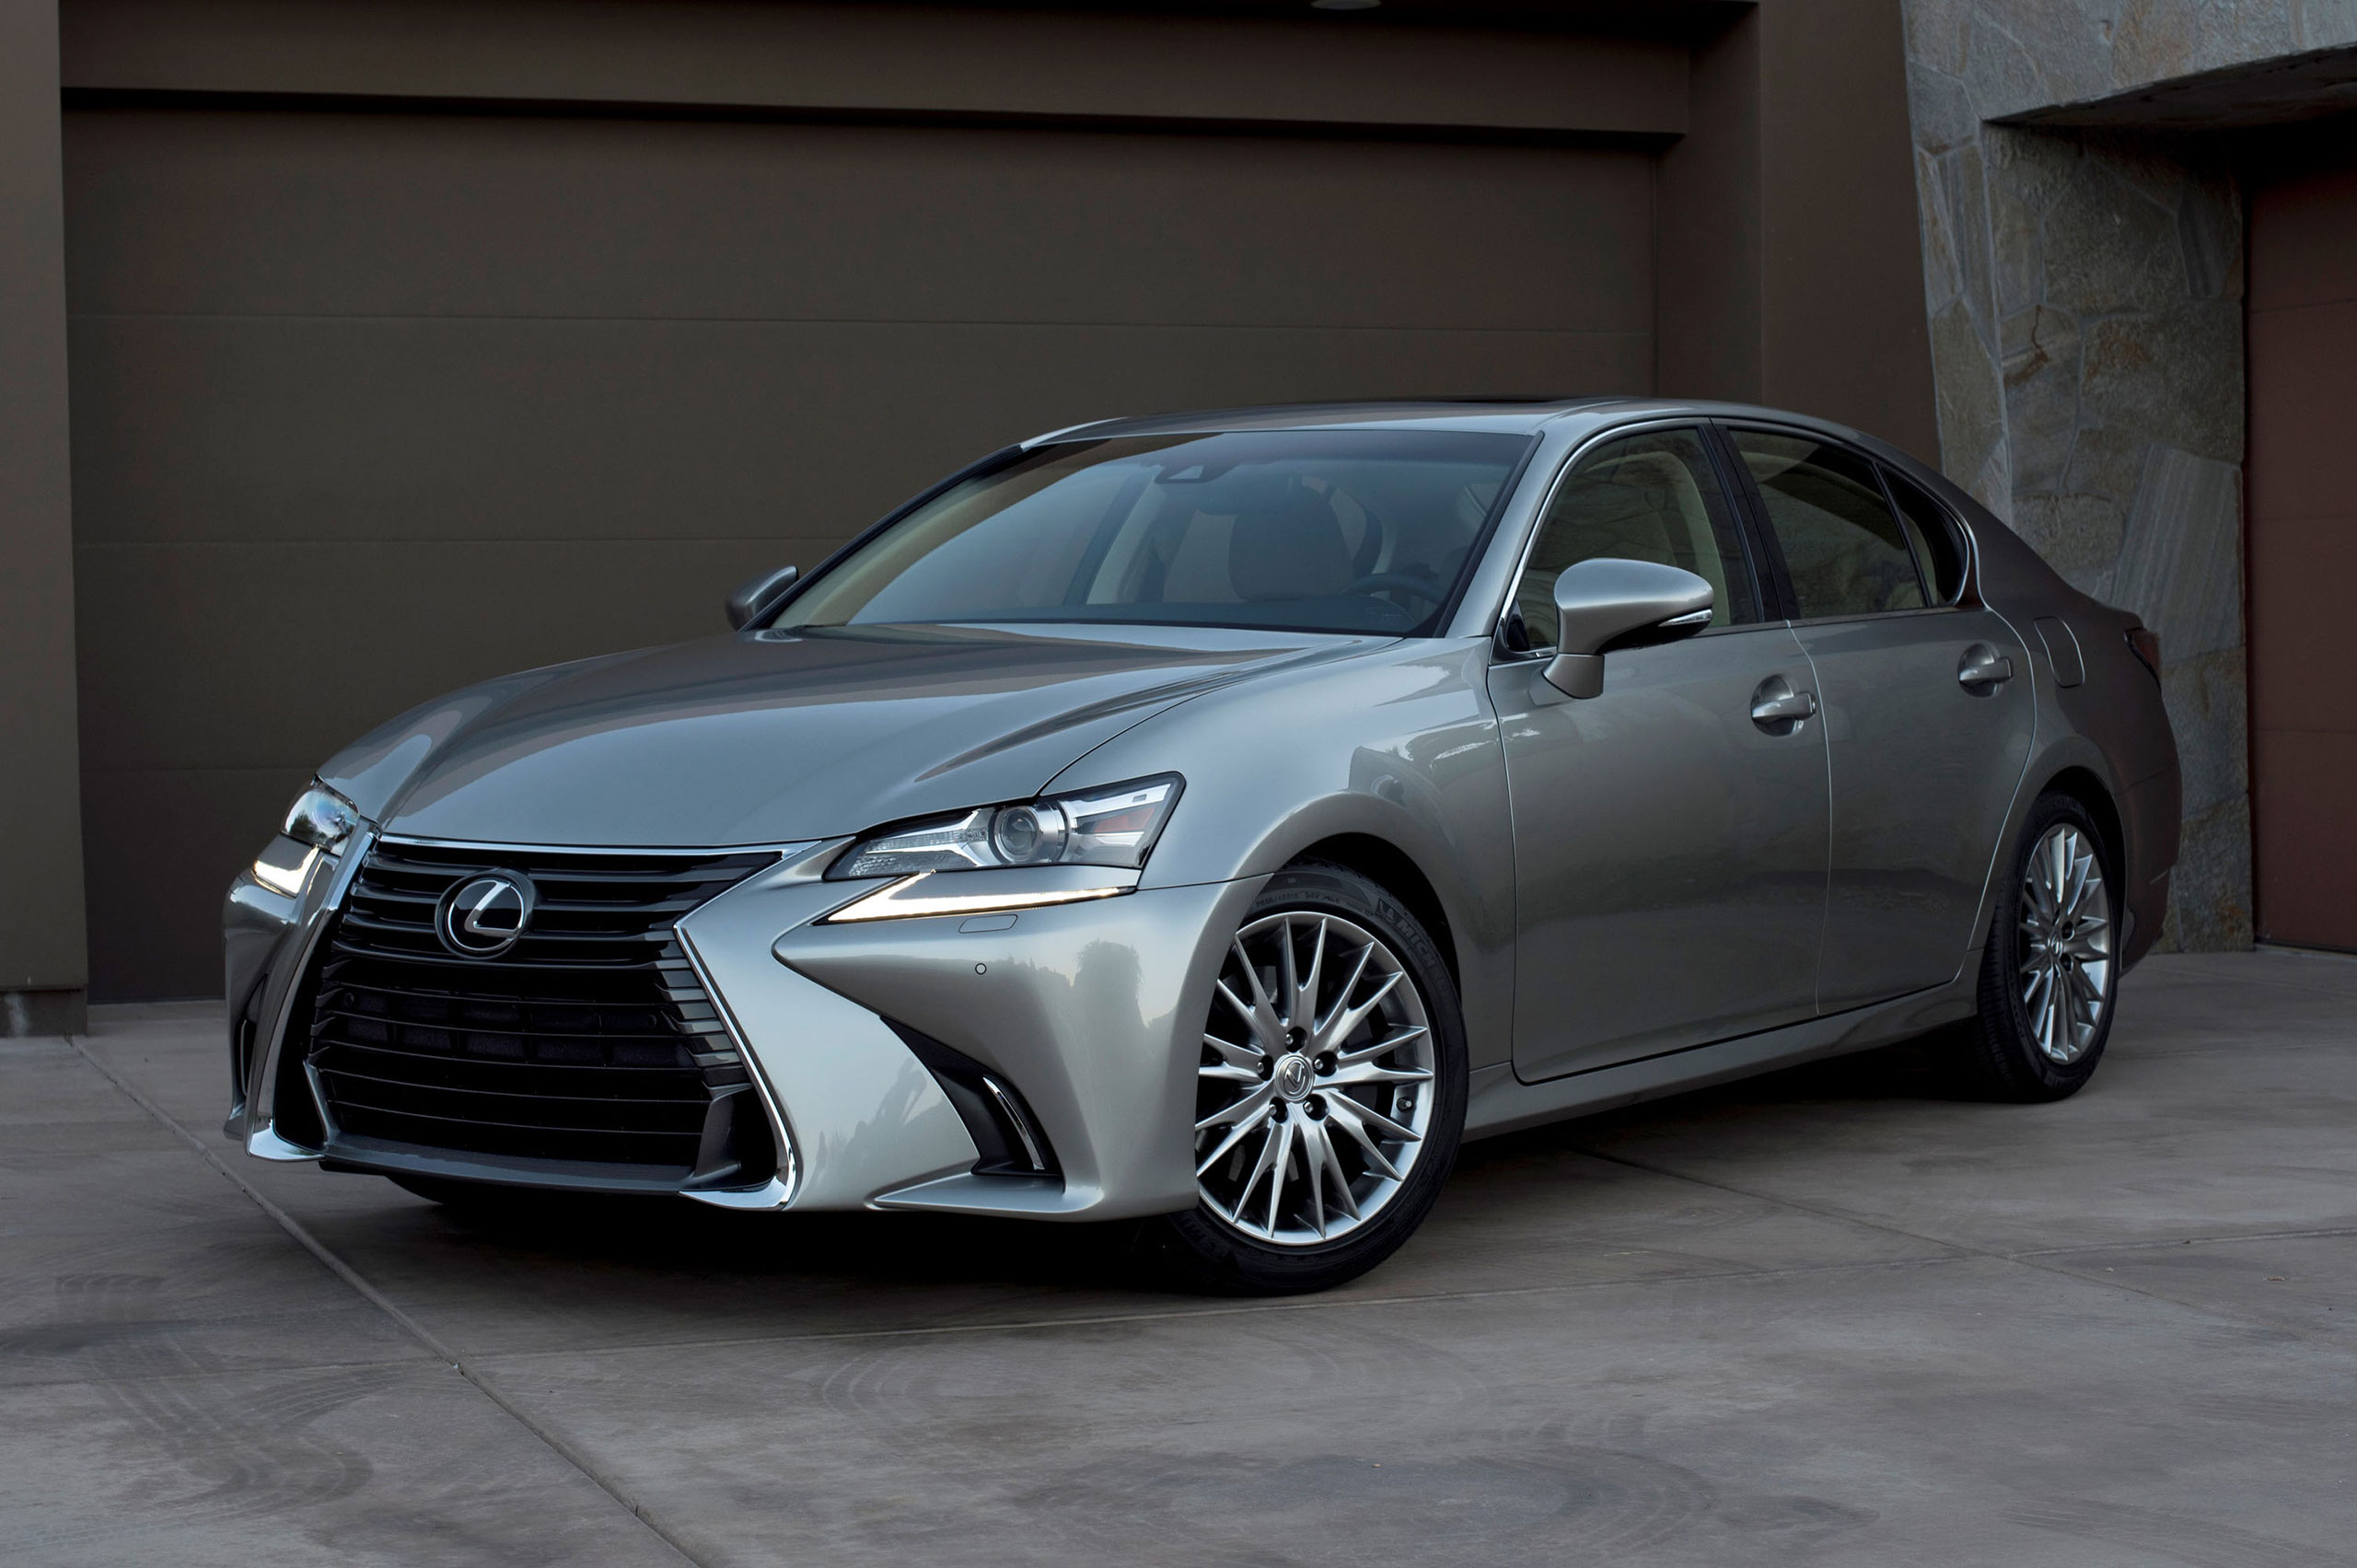 Updated 2016 Lexus Gs Lineup Now Includes Gs 200T With 2.0L Turbo Engine | Lexus Enthusiast